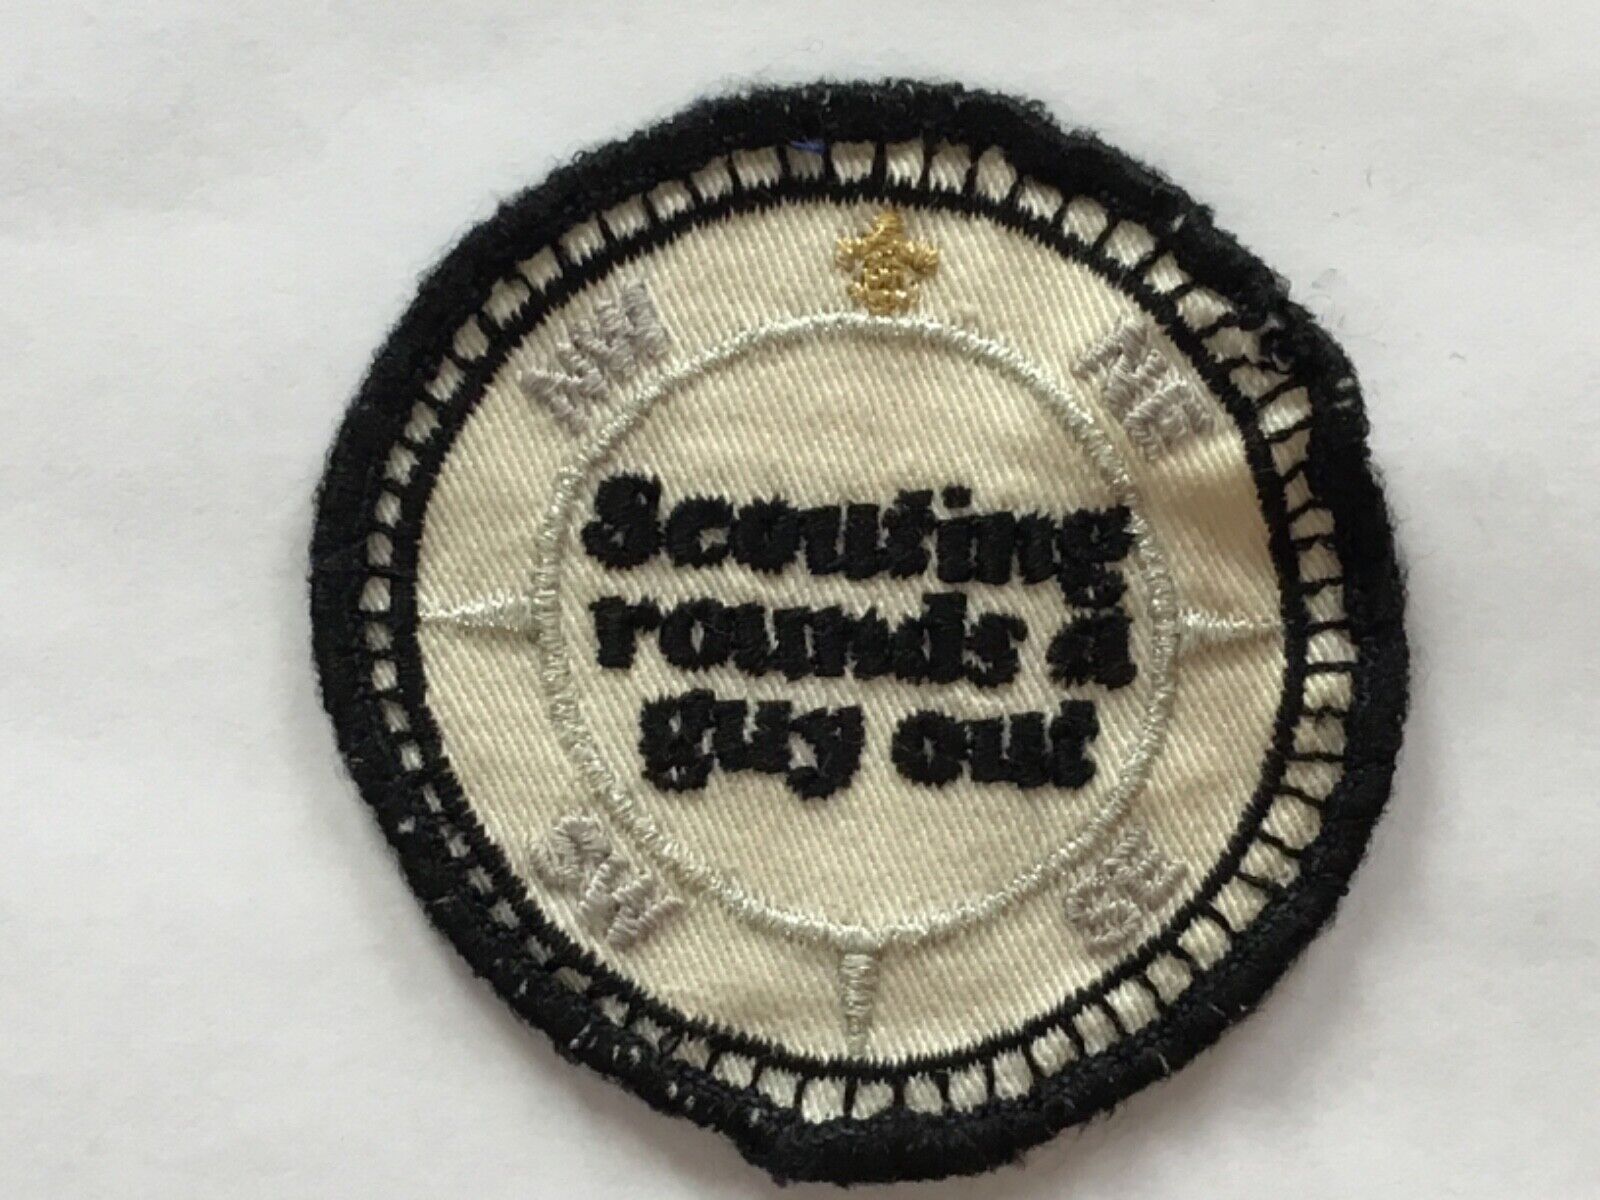 1965 Scouting Rounds A Guy Out patch